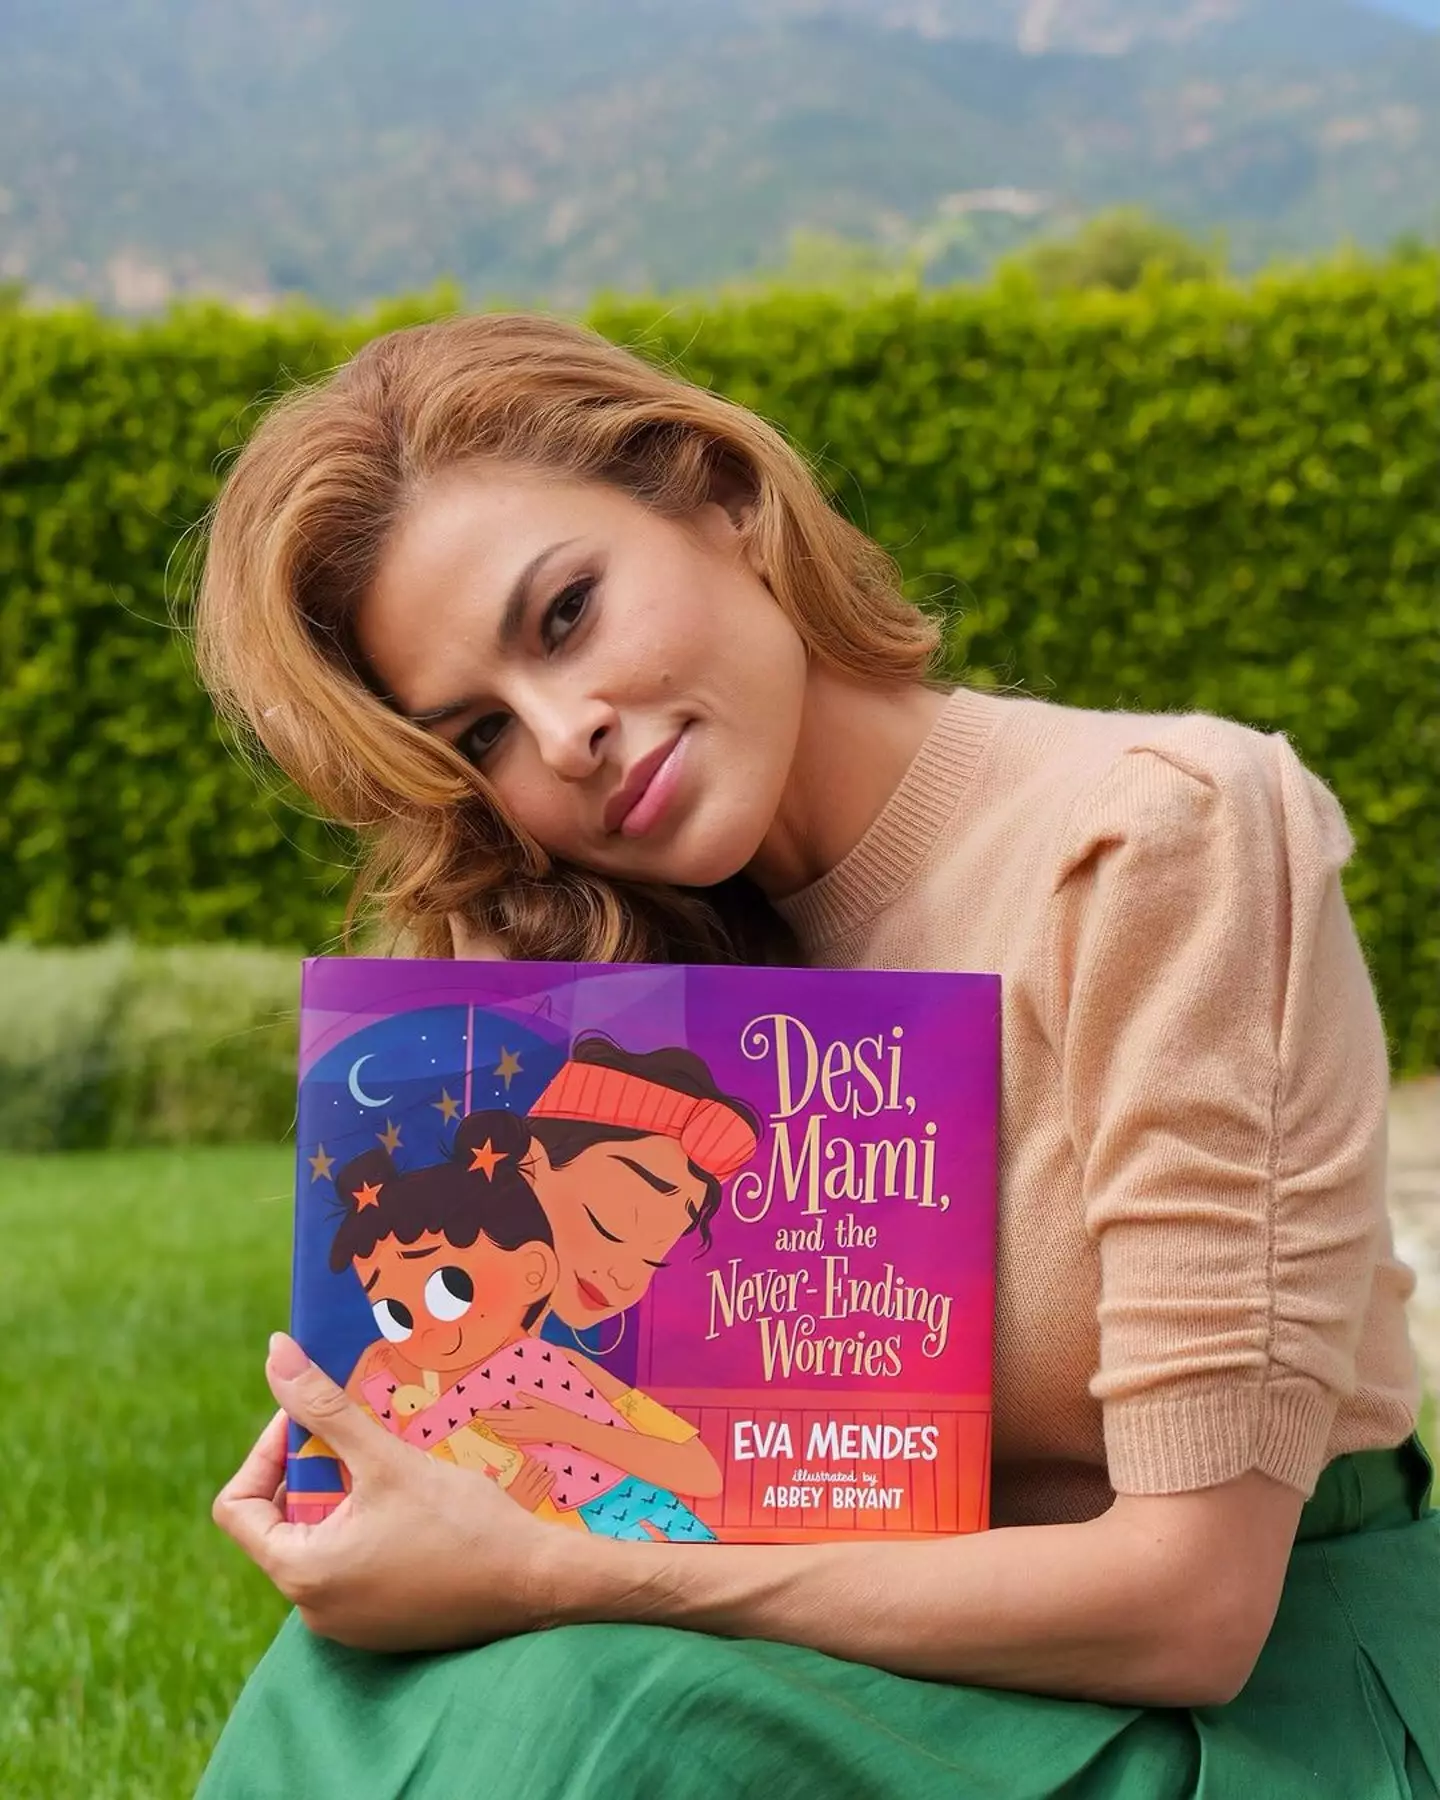 Desi, Mami and the Never-Ending Worries is Eva's first book. (Instagram/@evamendes)